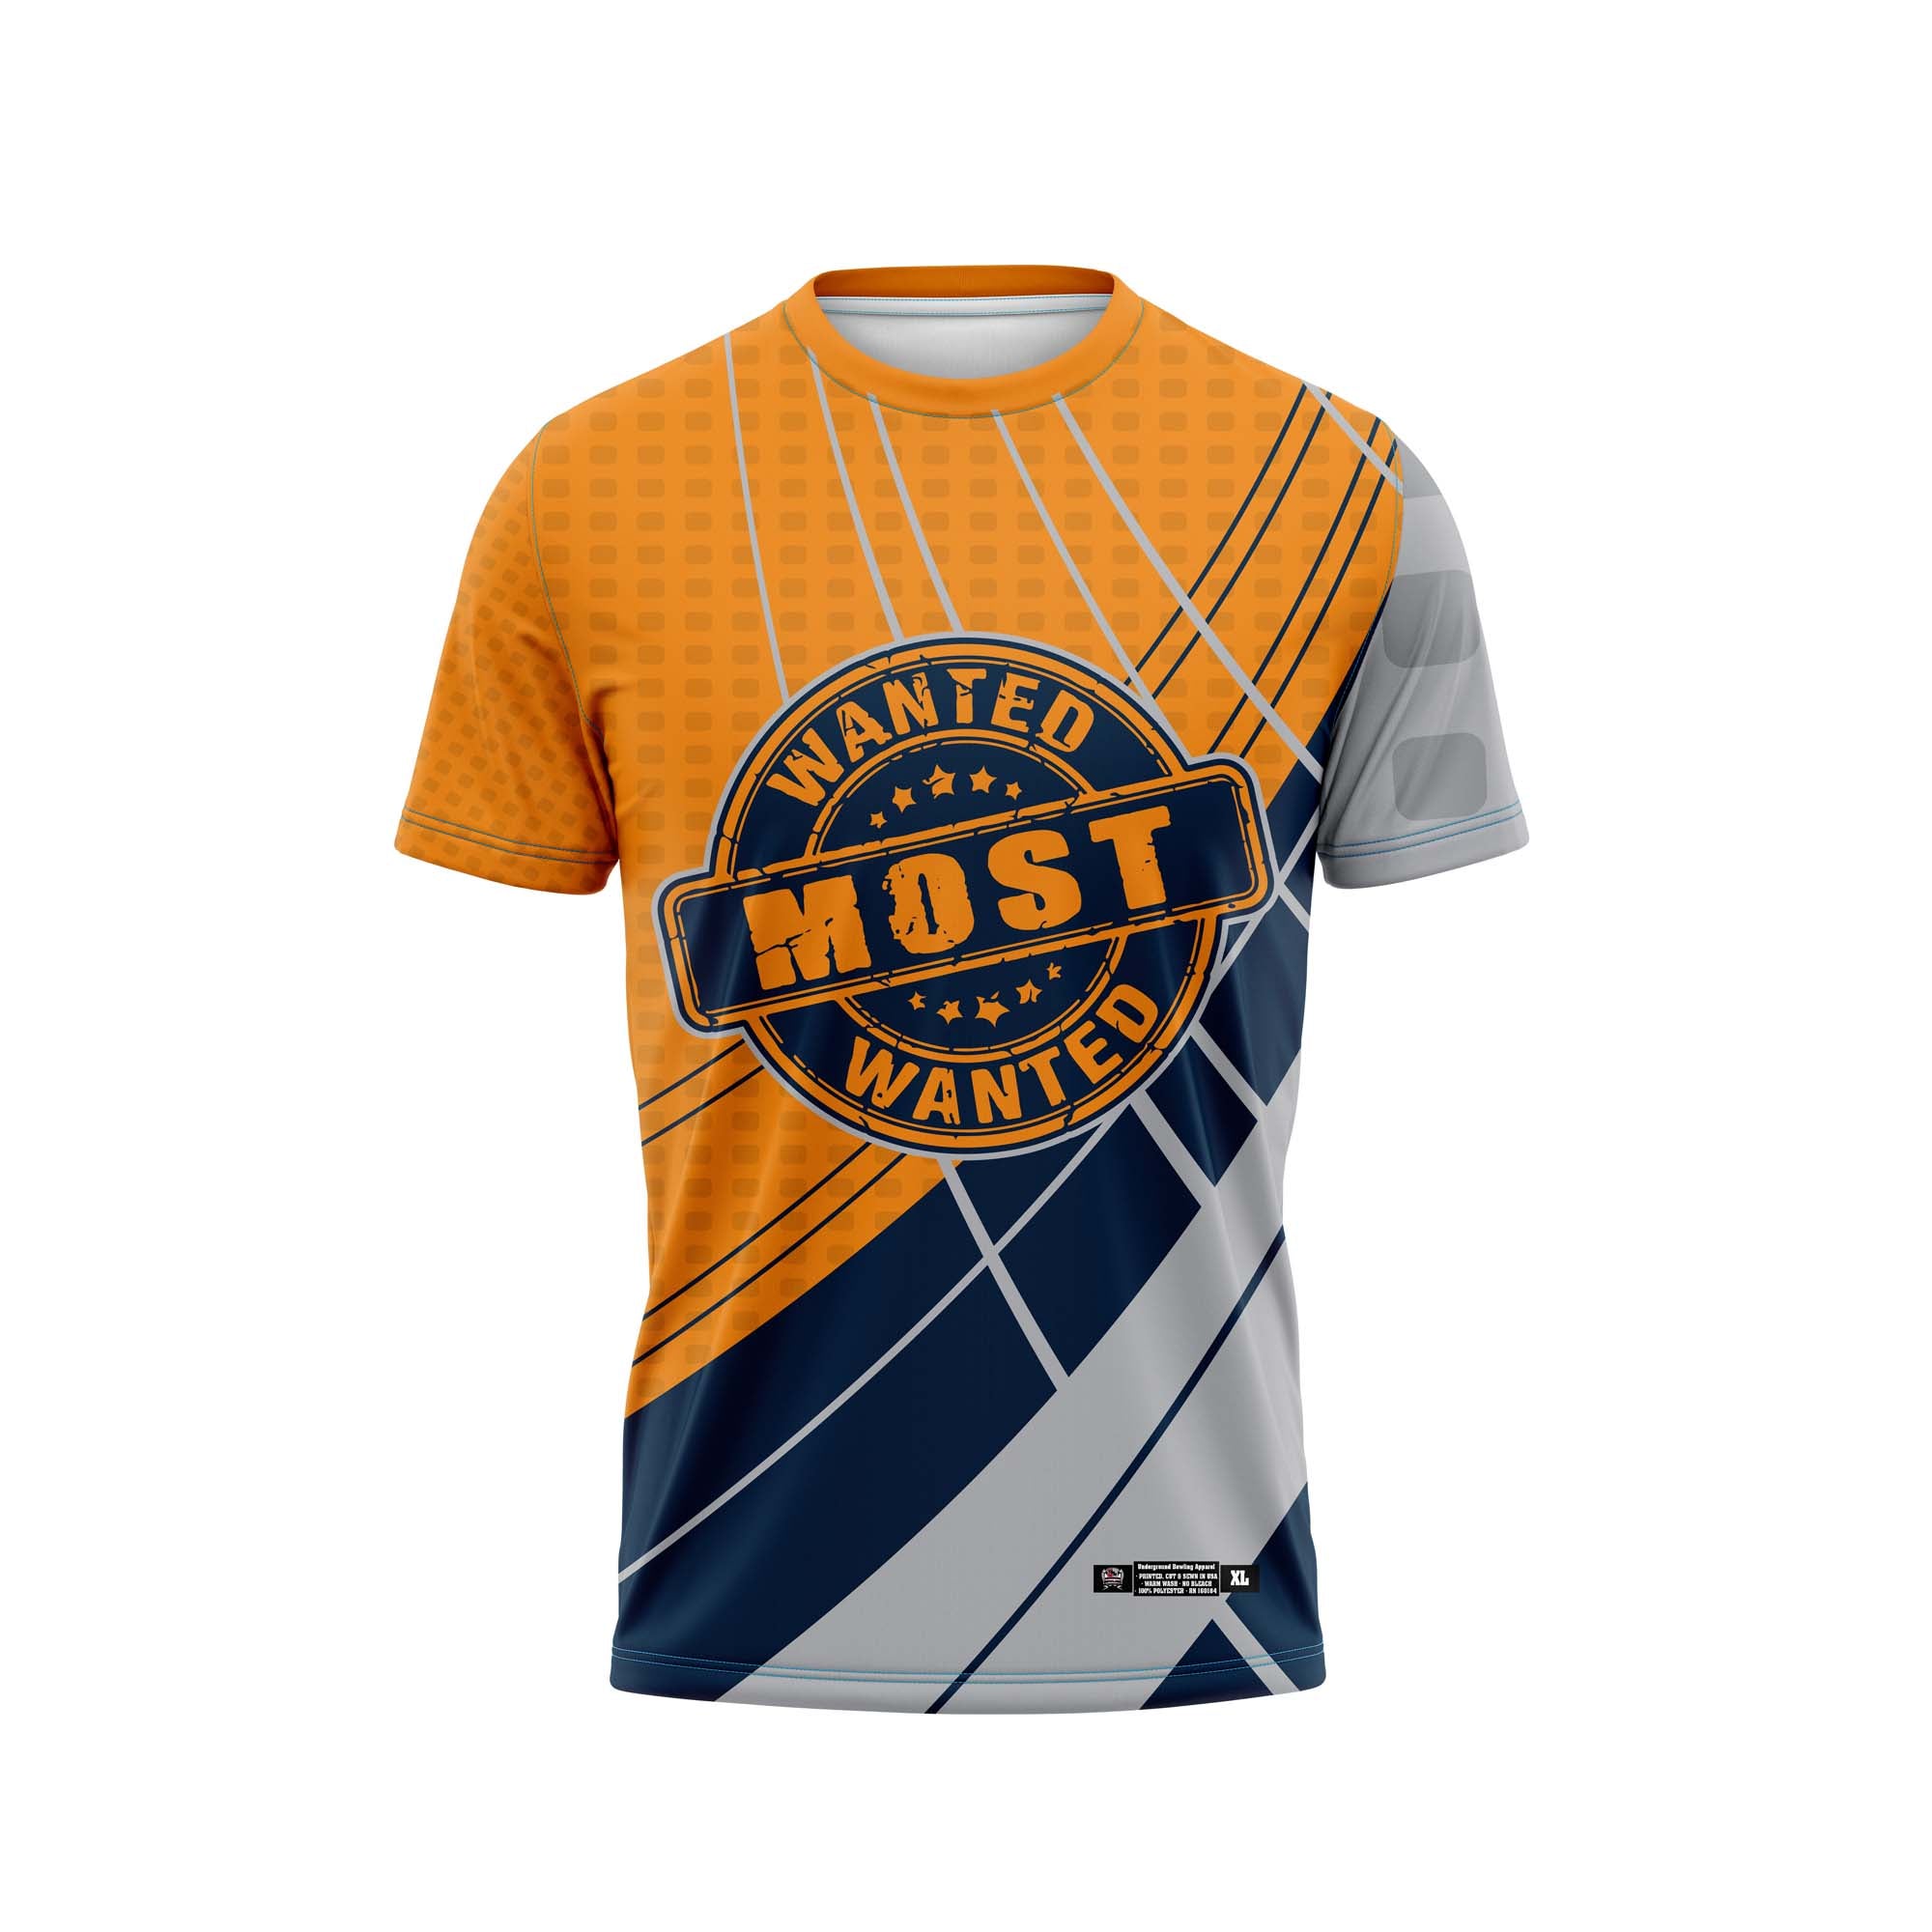 Most Wanted Orange Jersey